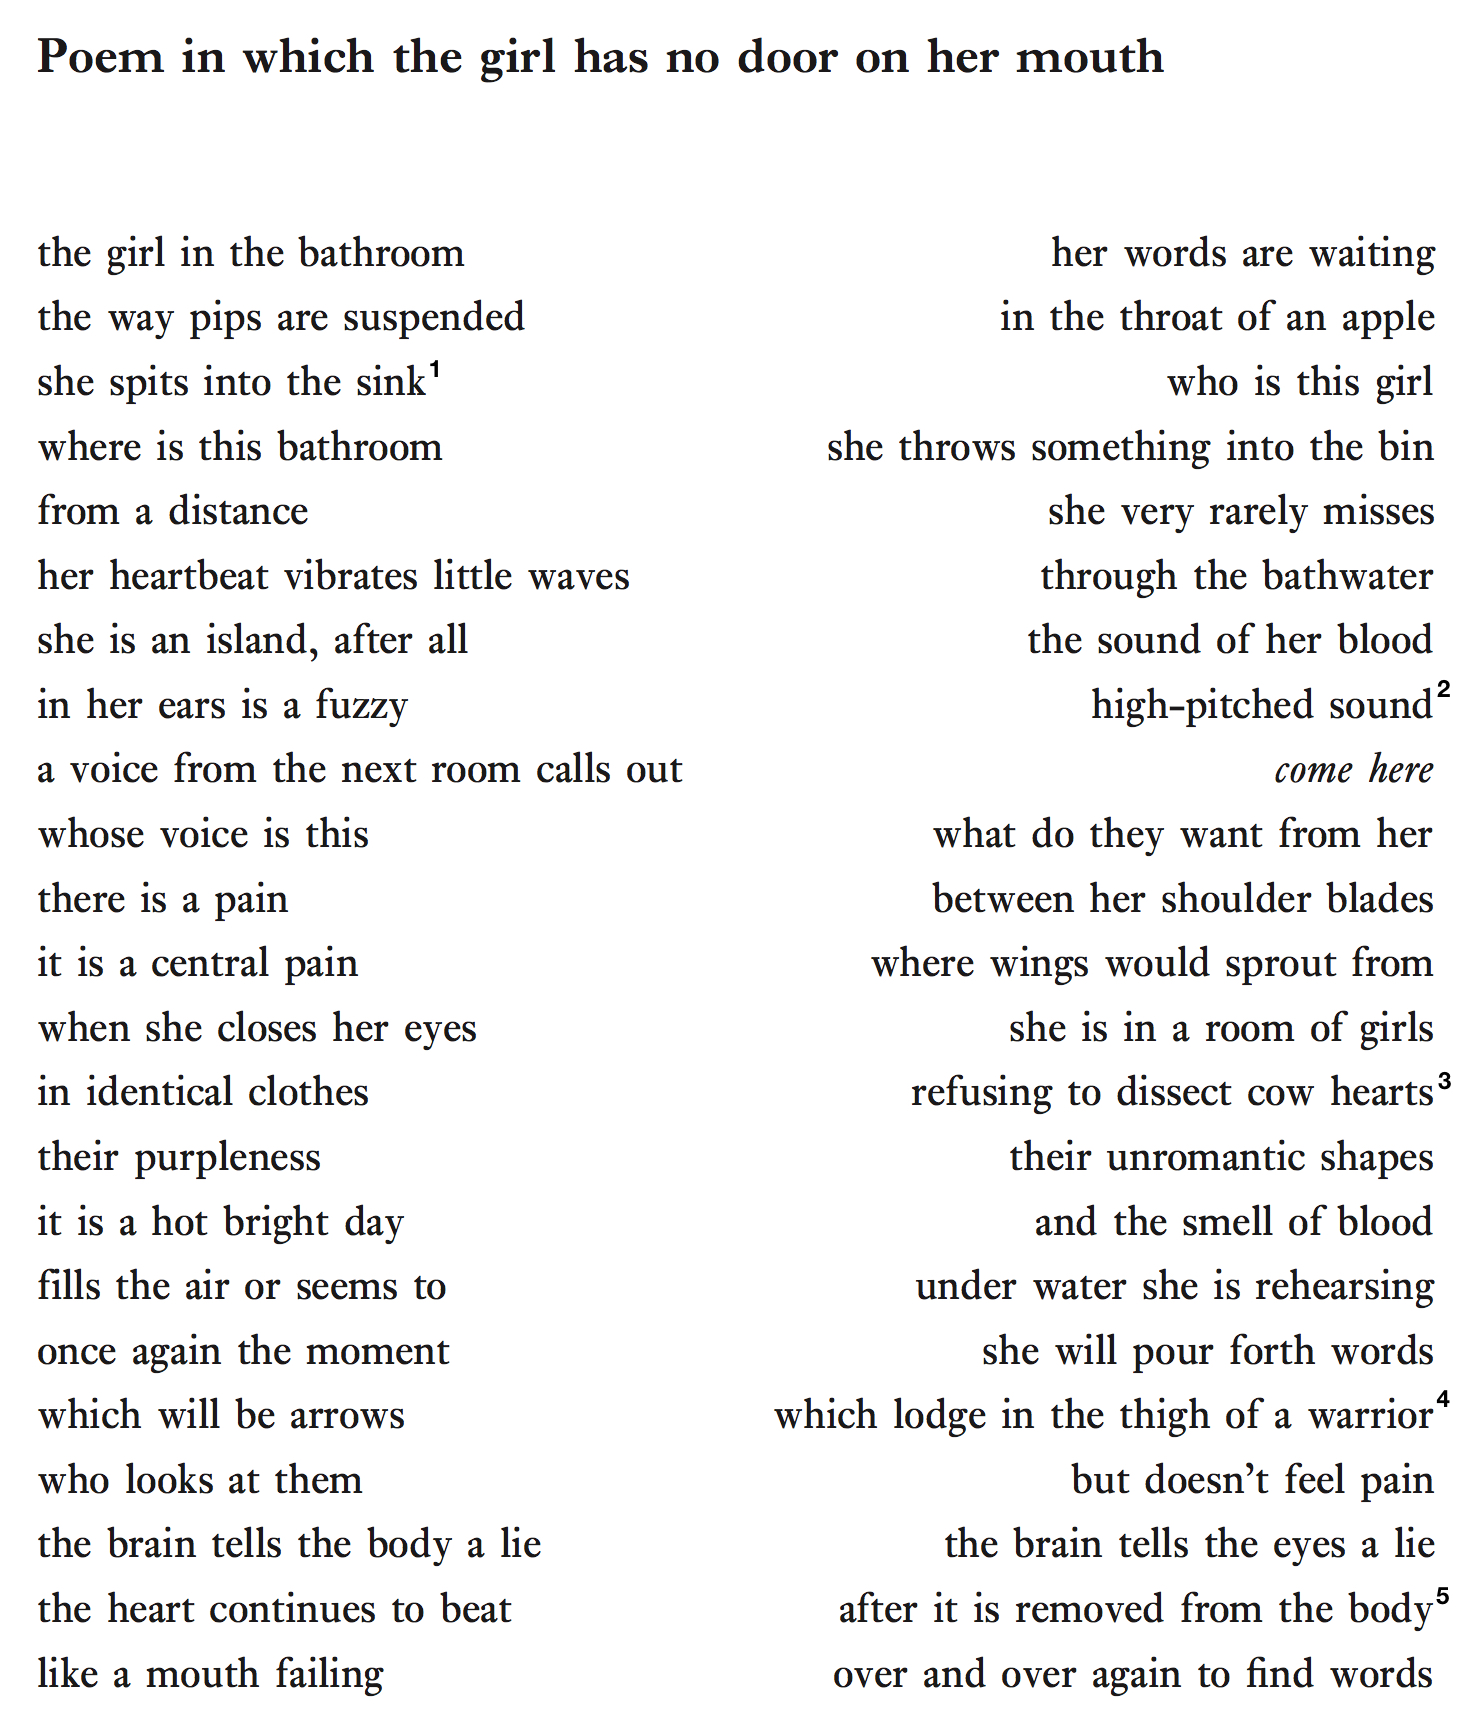 Poem in which the girl has no door on her mouth